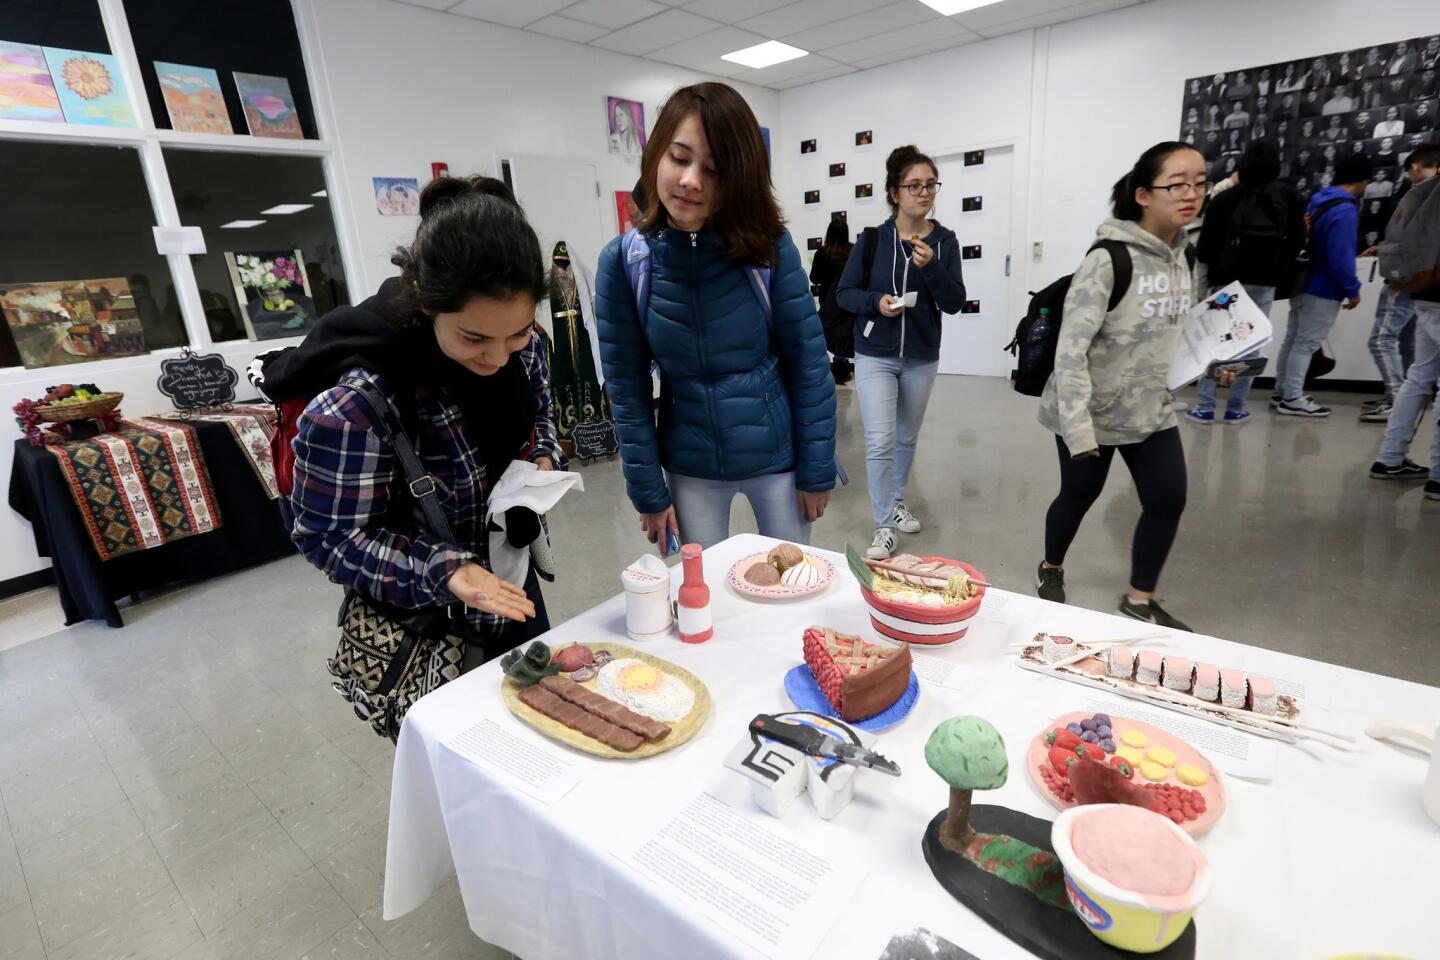 Juniors Anna Zadoorian, left, and Melissa McBryde, right, look at student ceramic work displayed at the inaugural student exhibition called Insight at Hoover High School in Glendale on Friday, Feb. 15, 2019. The event runs through March 31st.